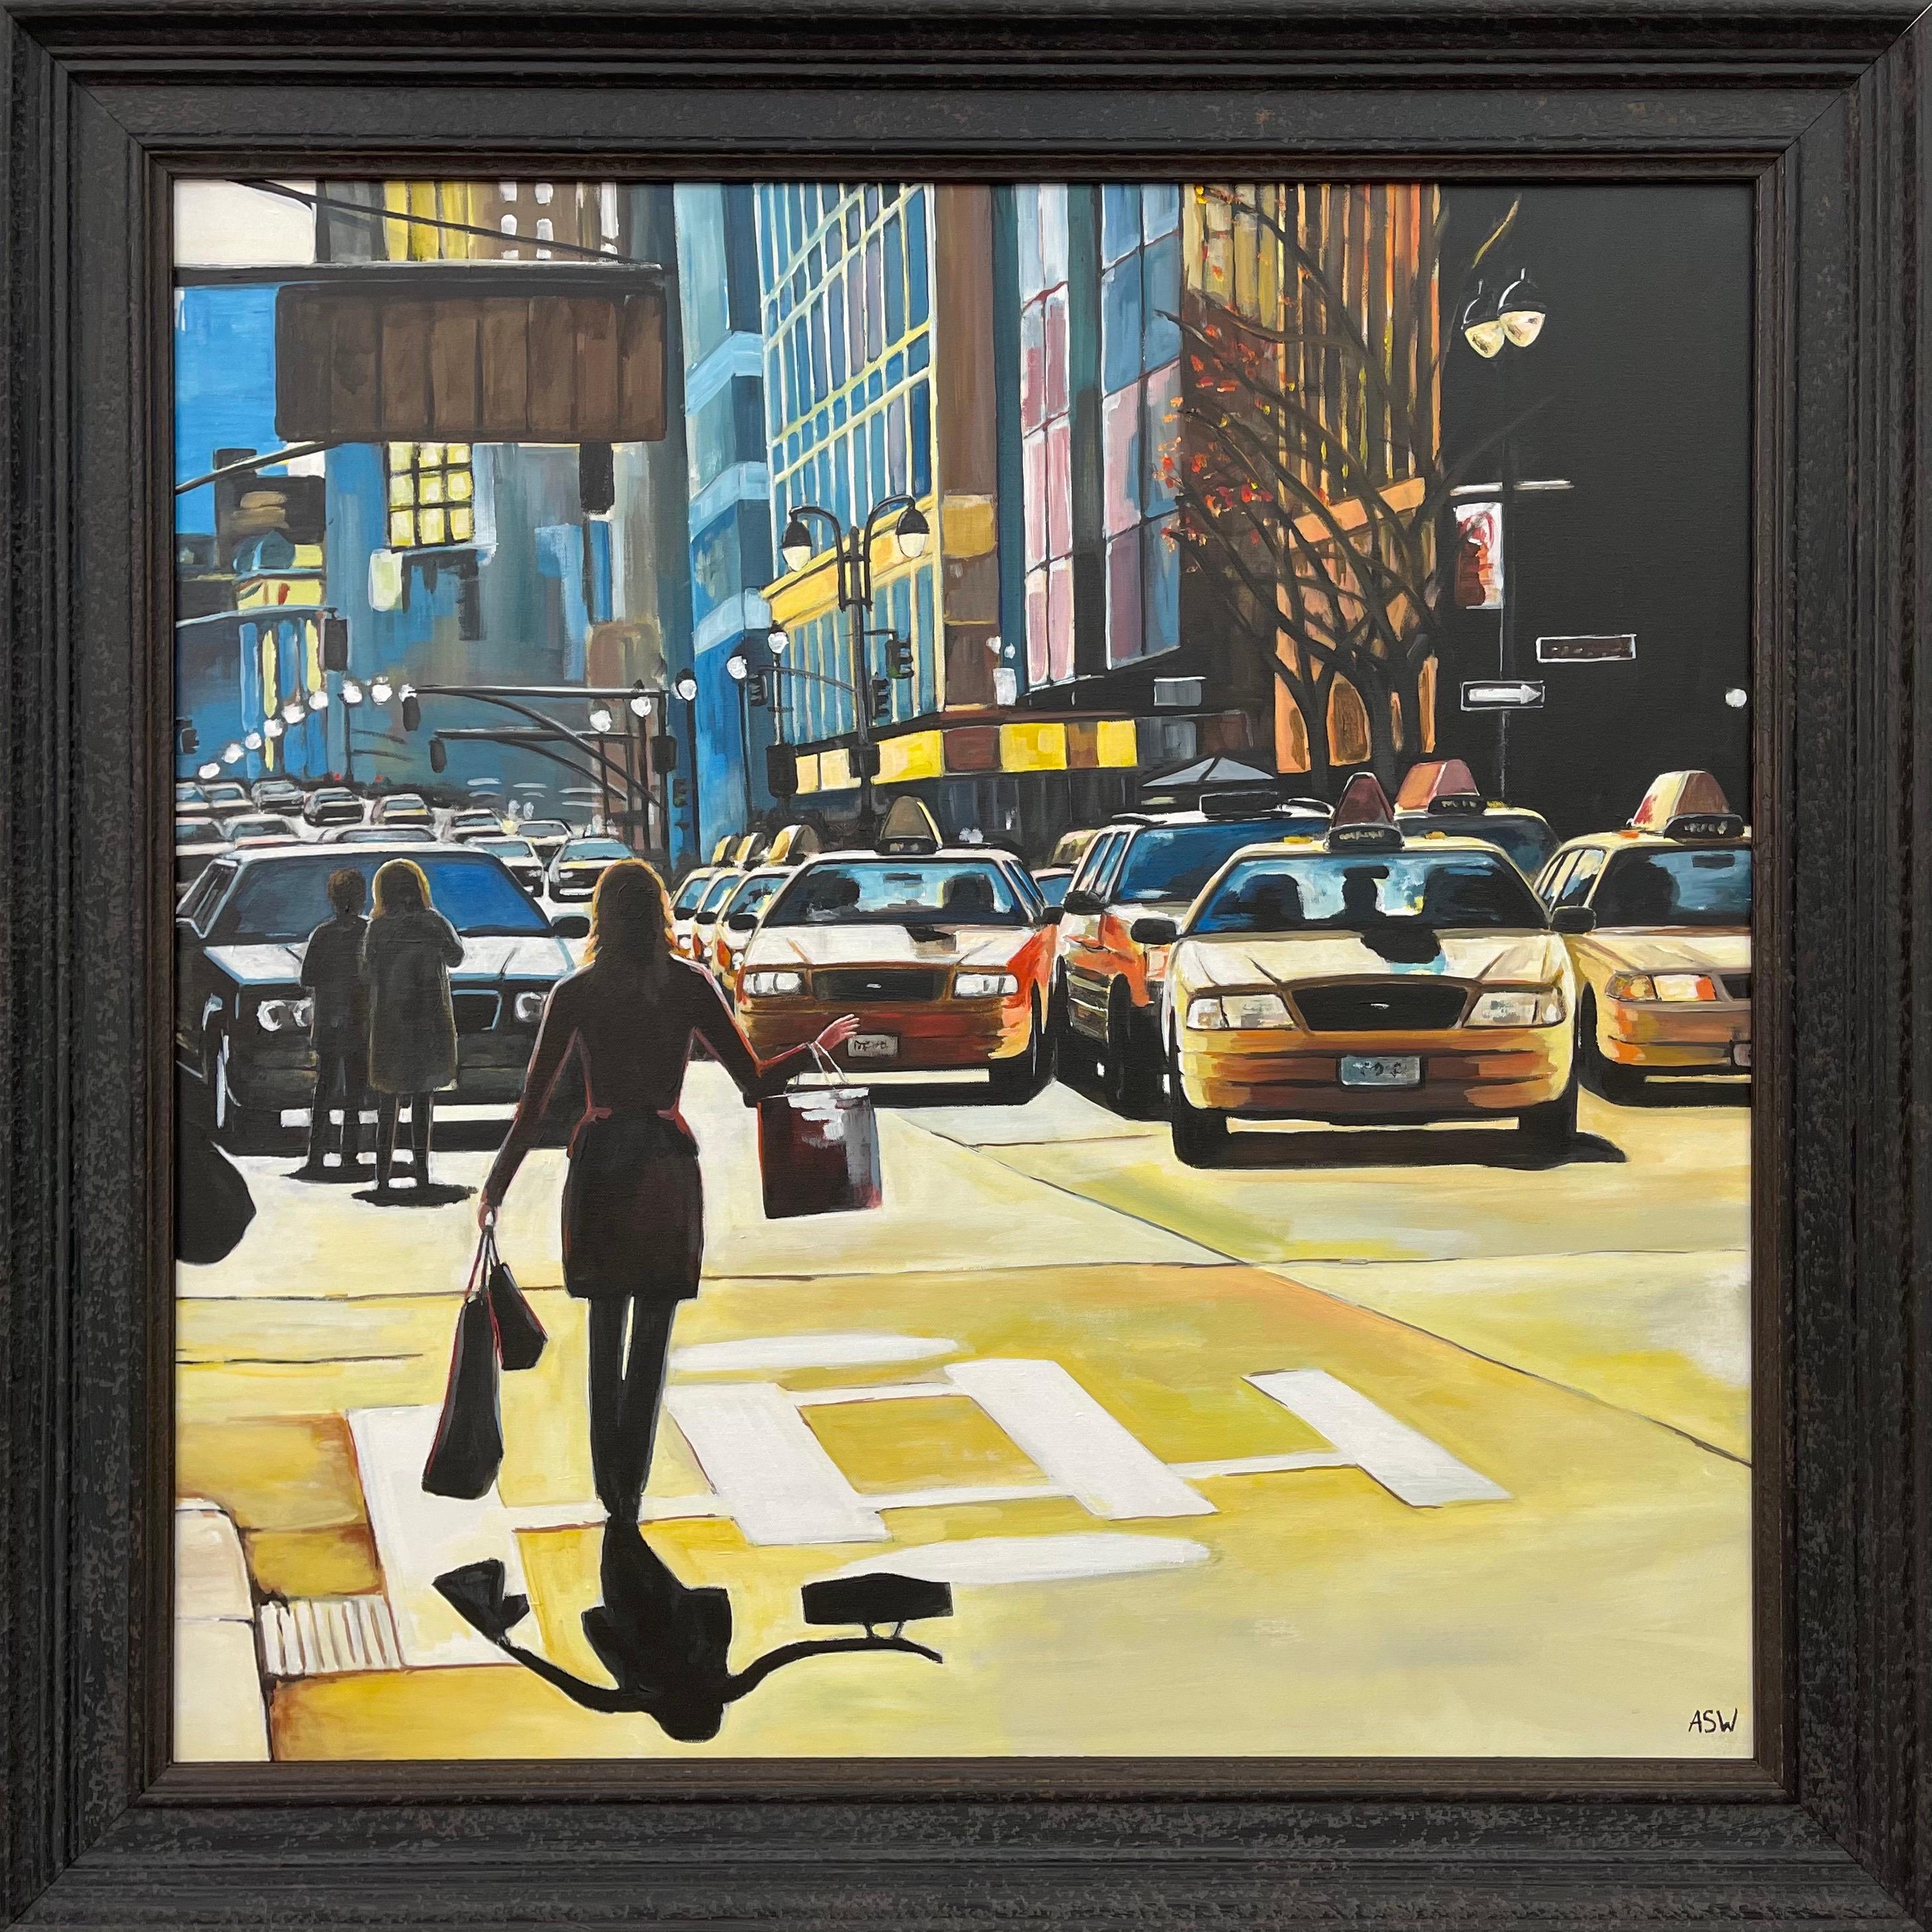 Female Figure Shopping in New York City Sunshine by Contemporary British Artist